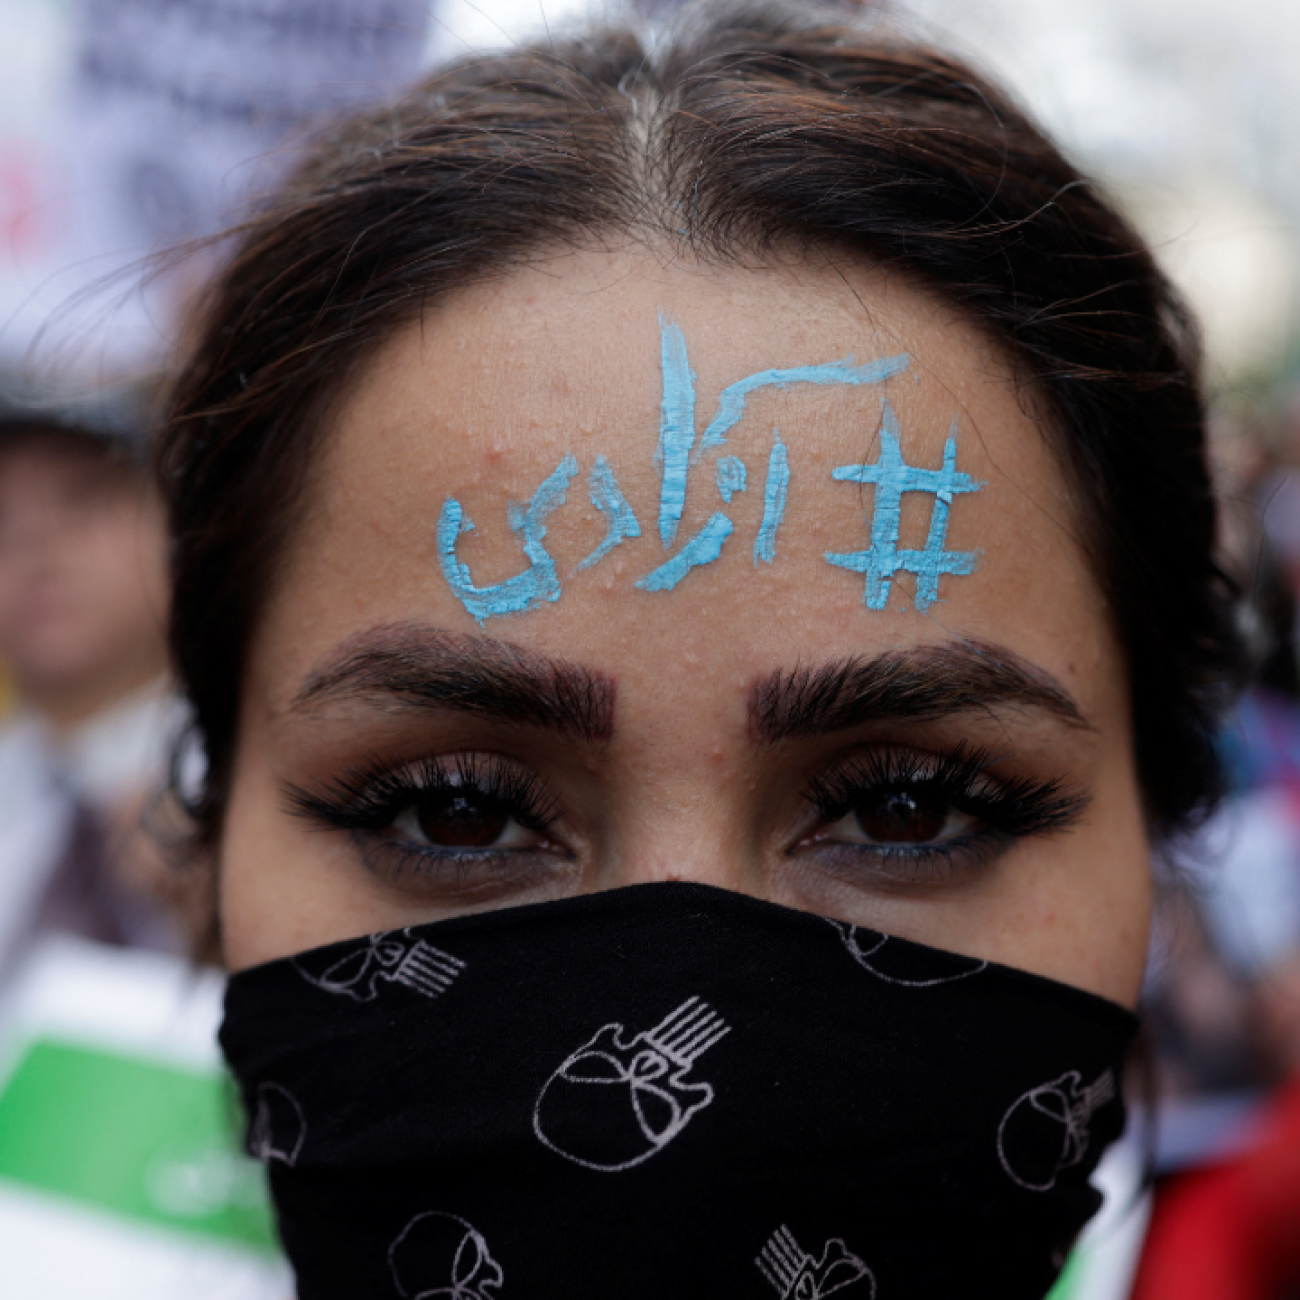 A woman wears a face mask and has the words "Freedom" written in blue paint on her forehead in Arabic. She takes part in a protest following the death of Mahsa Amini, near the Iranian consulate in Istanbul, Turkey, October 4, 2022. 